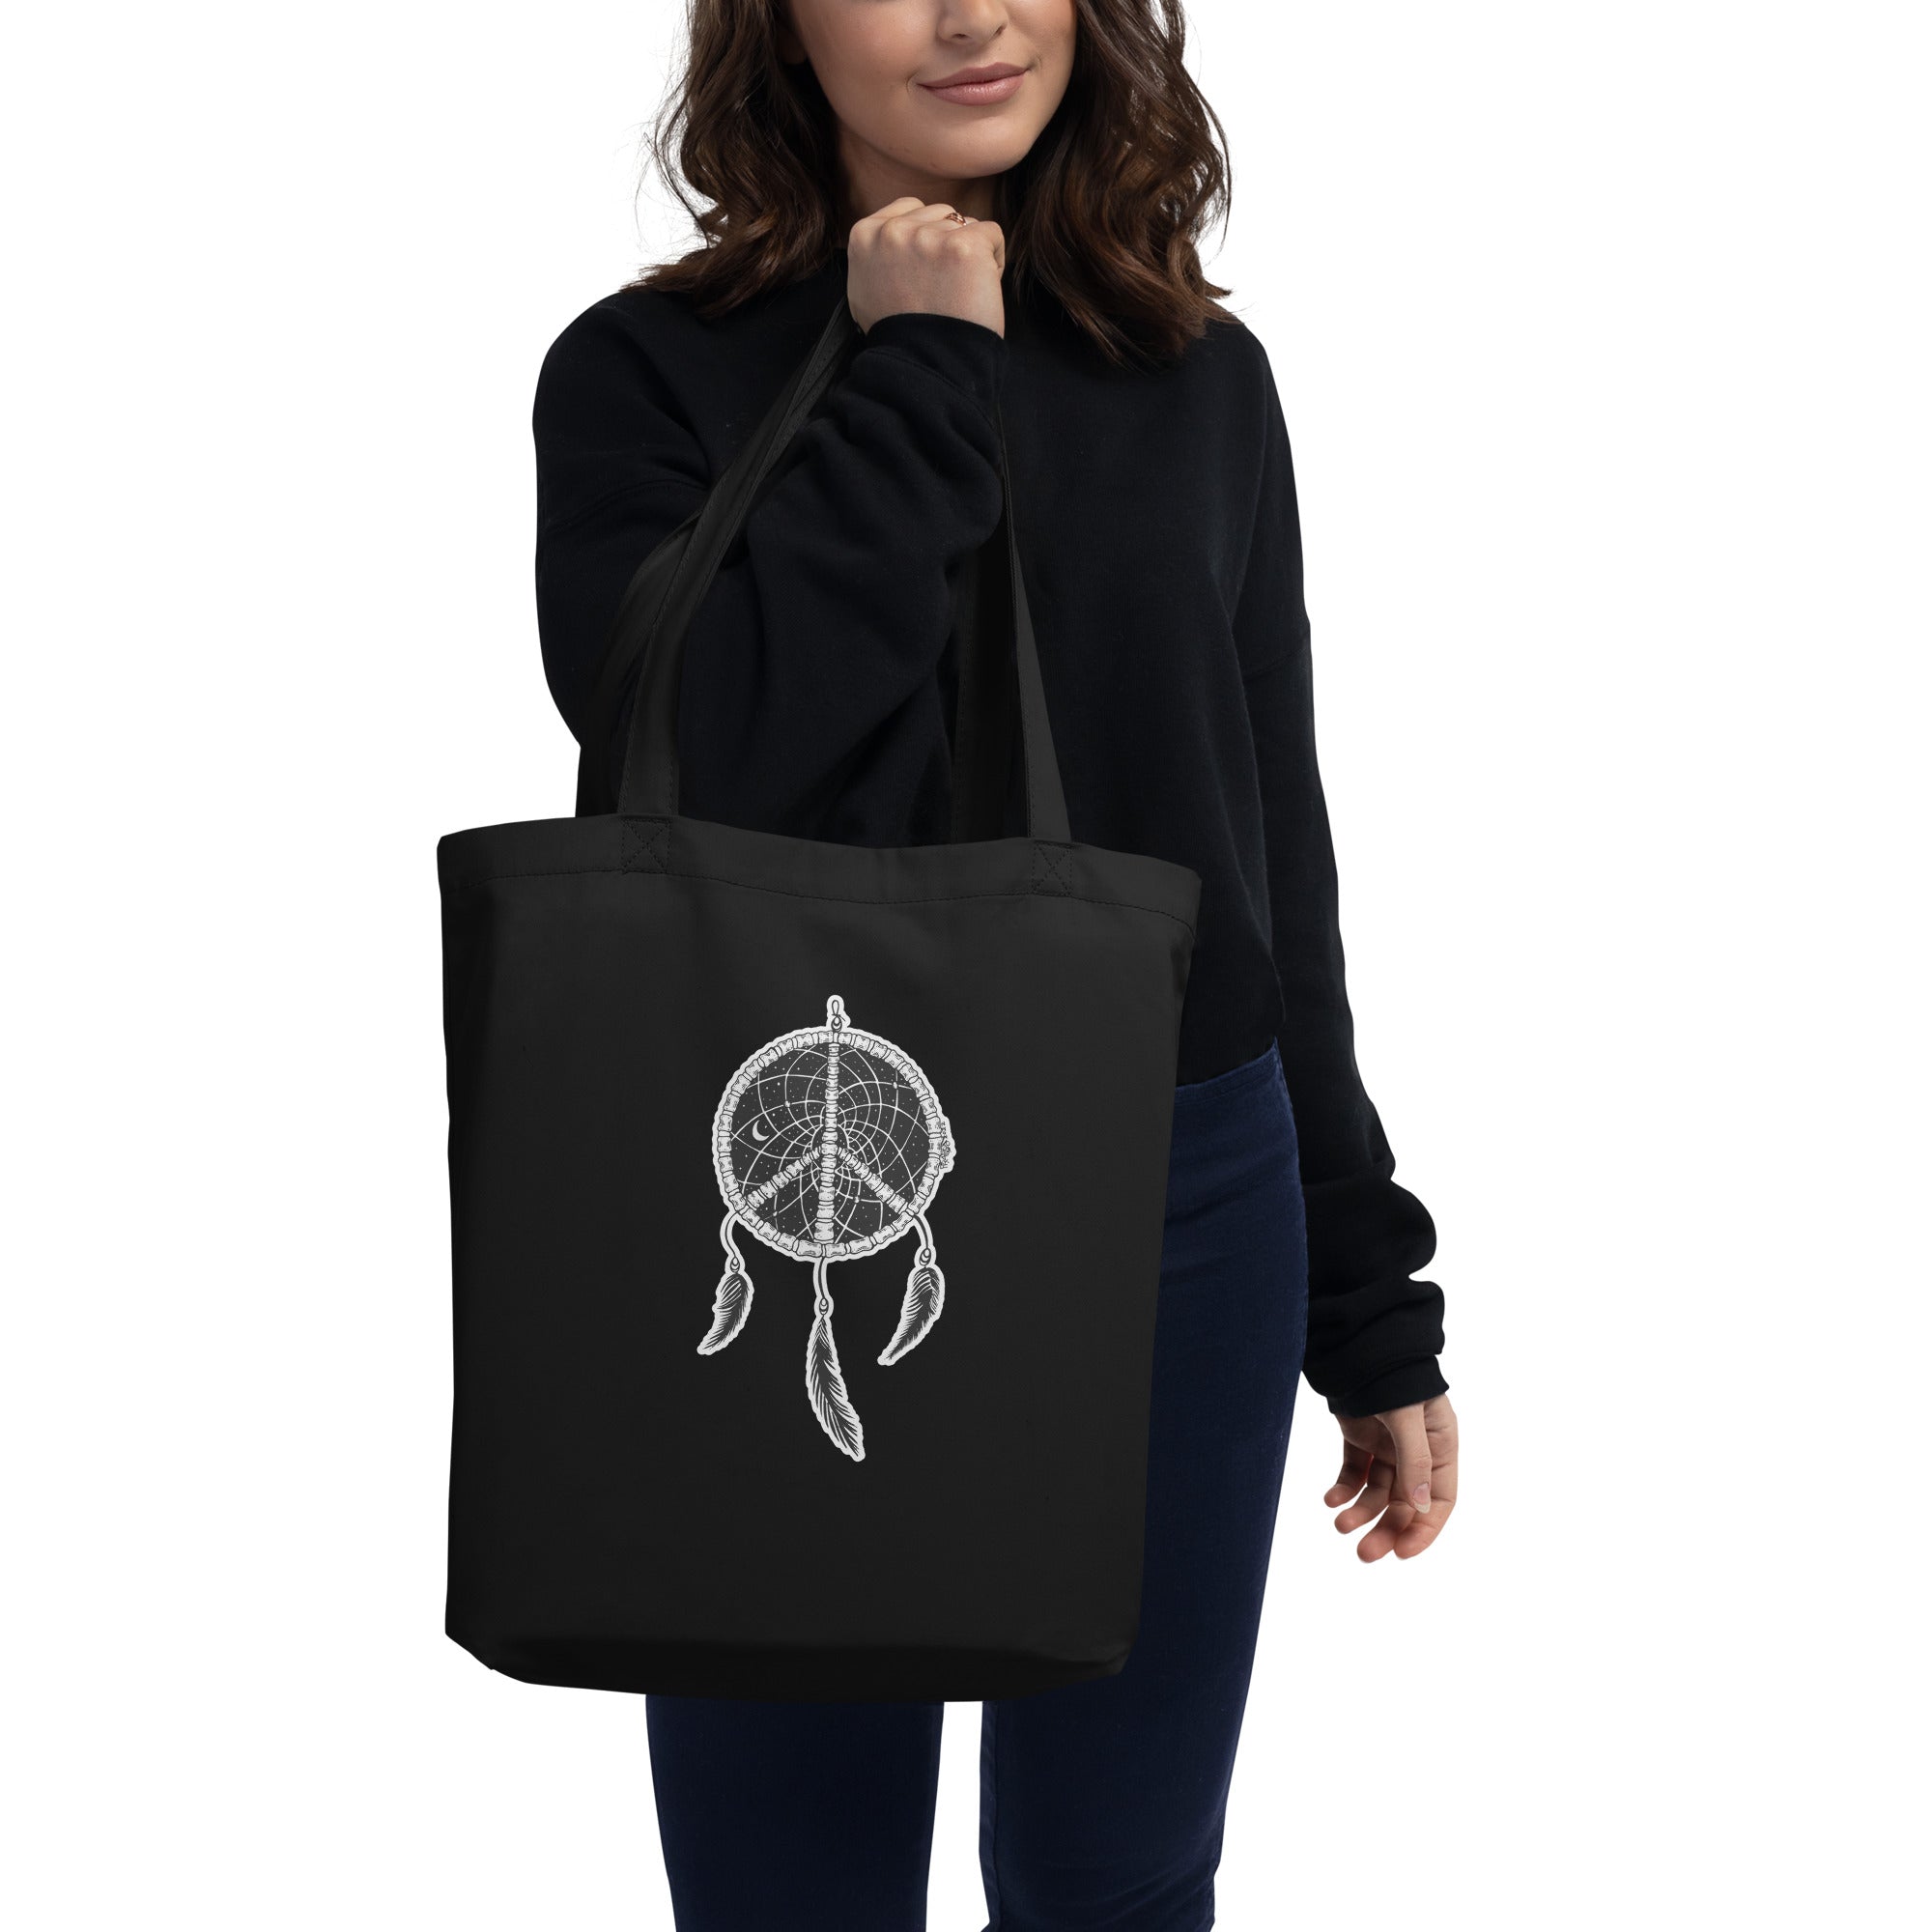 Dreamcatcher Organic Cotton Tote Bag In Black By Artist Rick Frausto